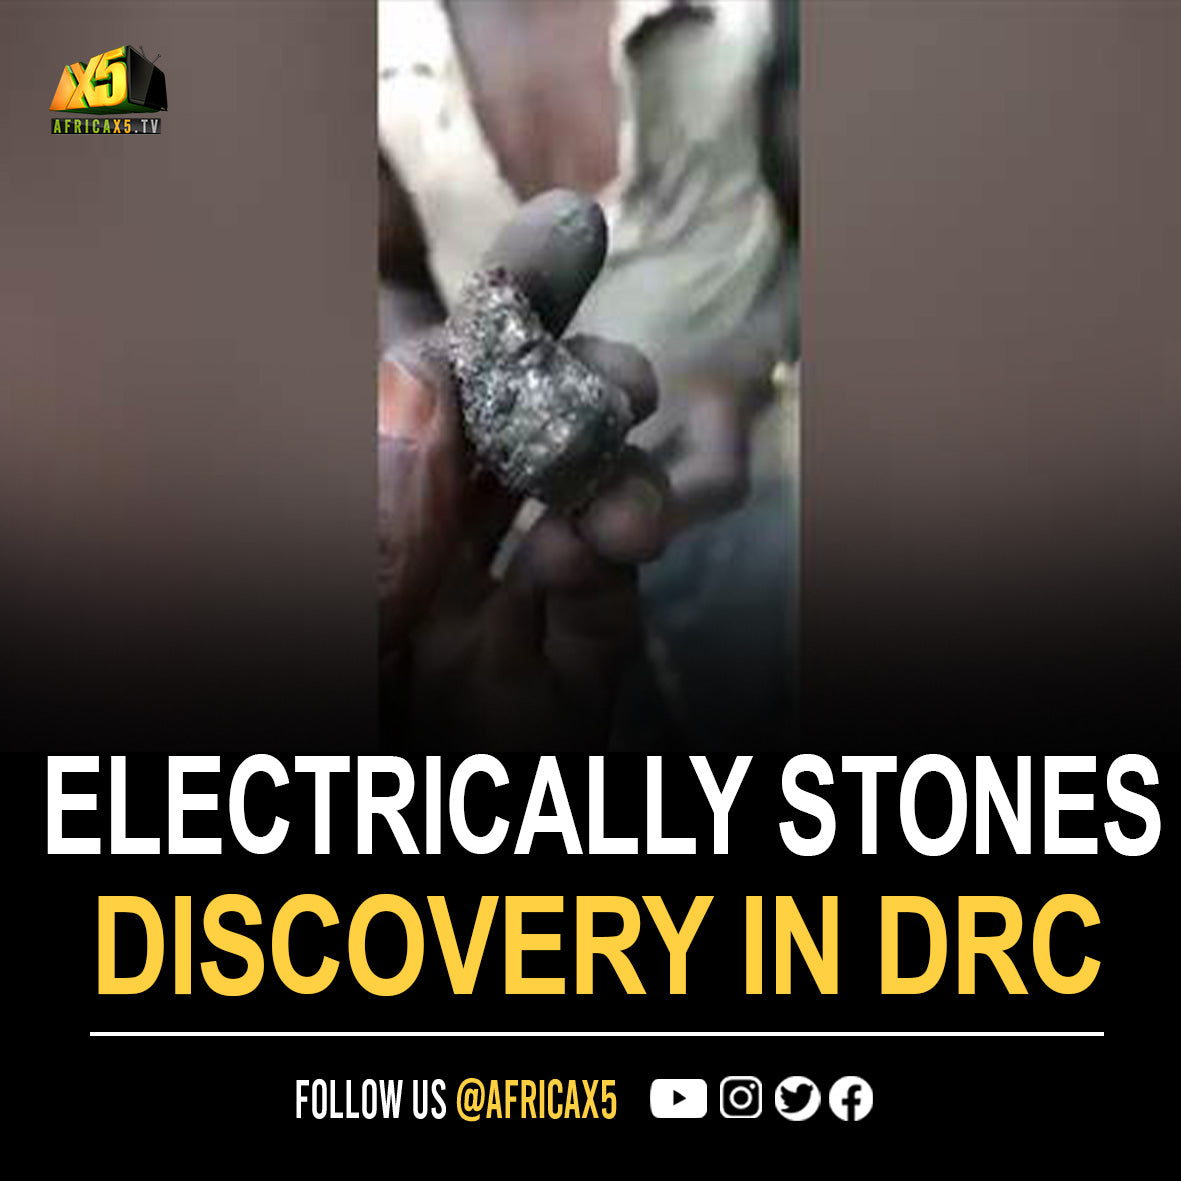 Electrically charged stones discovered in the Democratic Republic of the Congo.